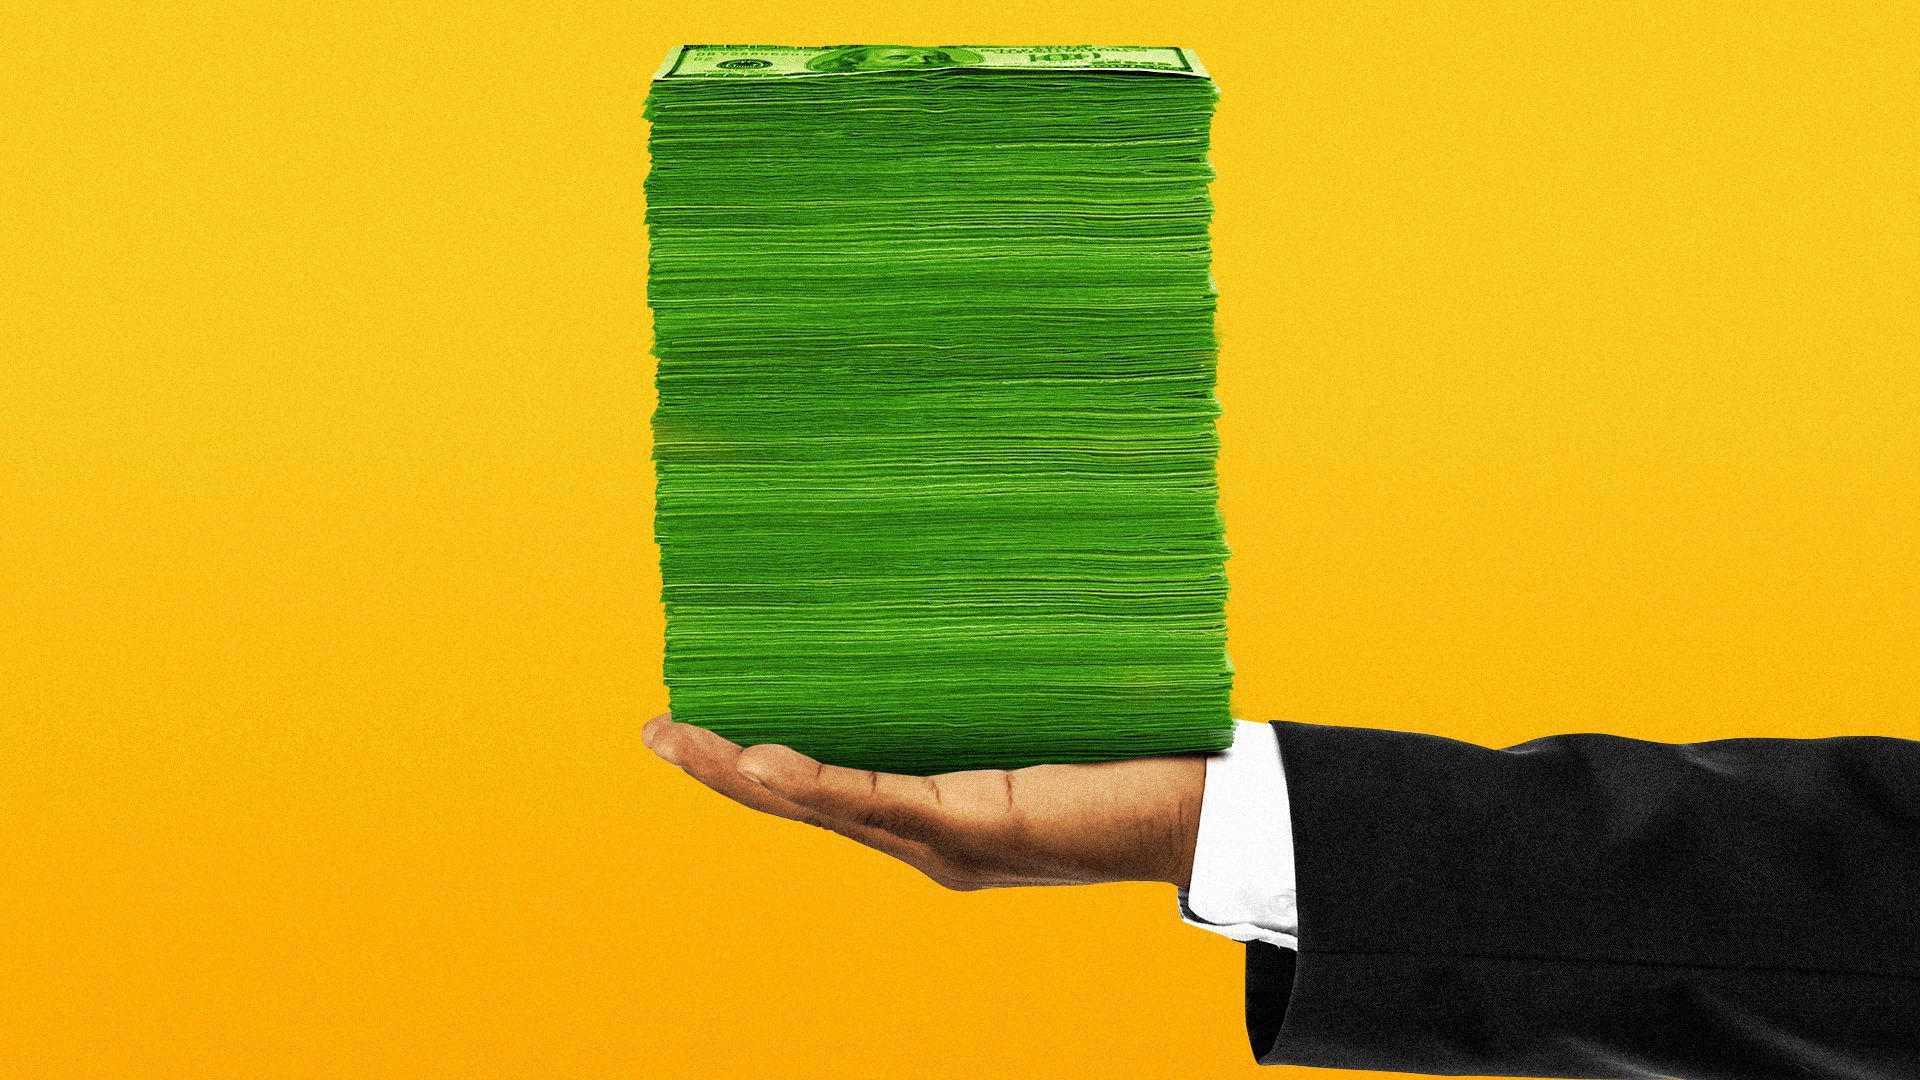 Illustration of a person holding a stack of bills.